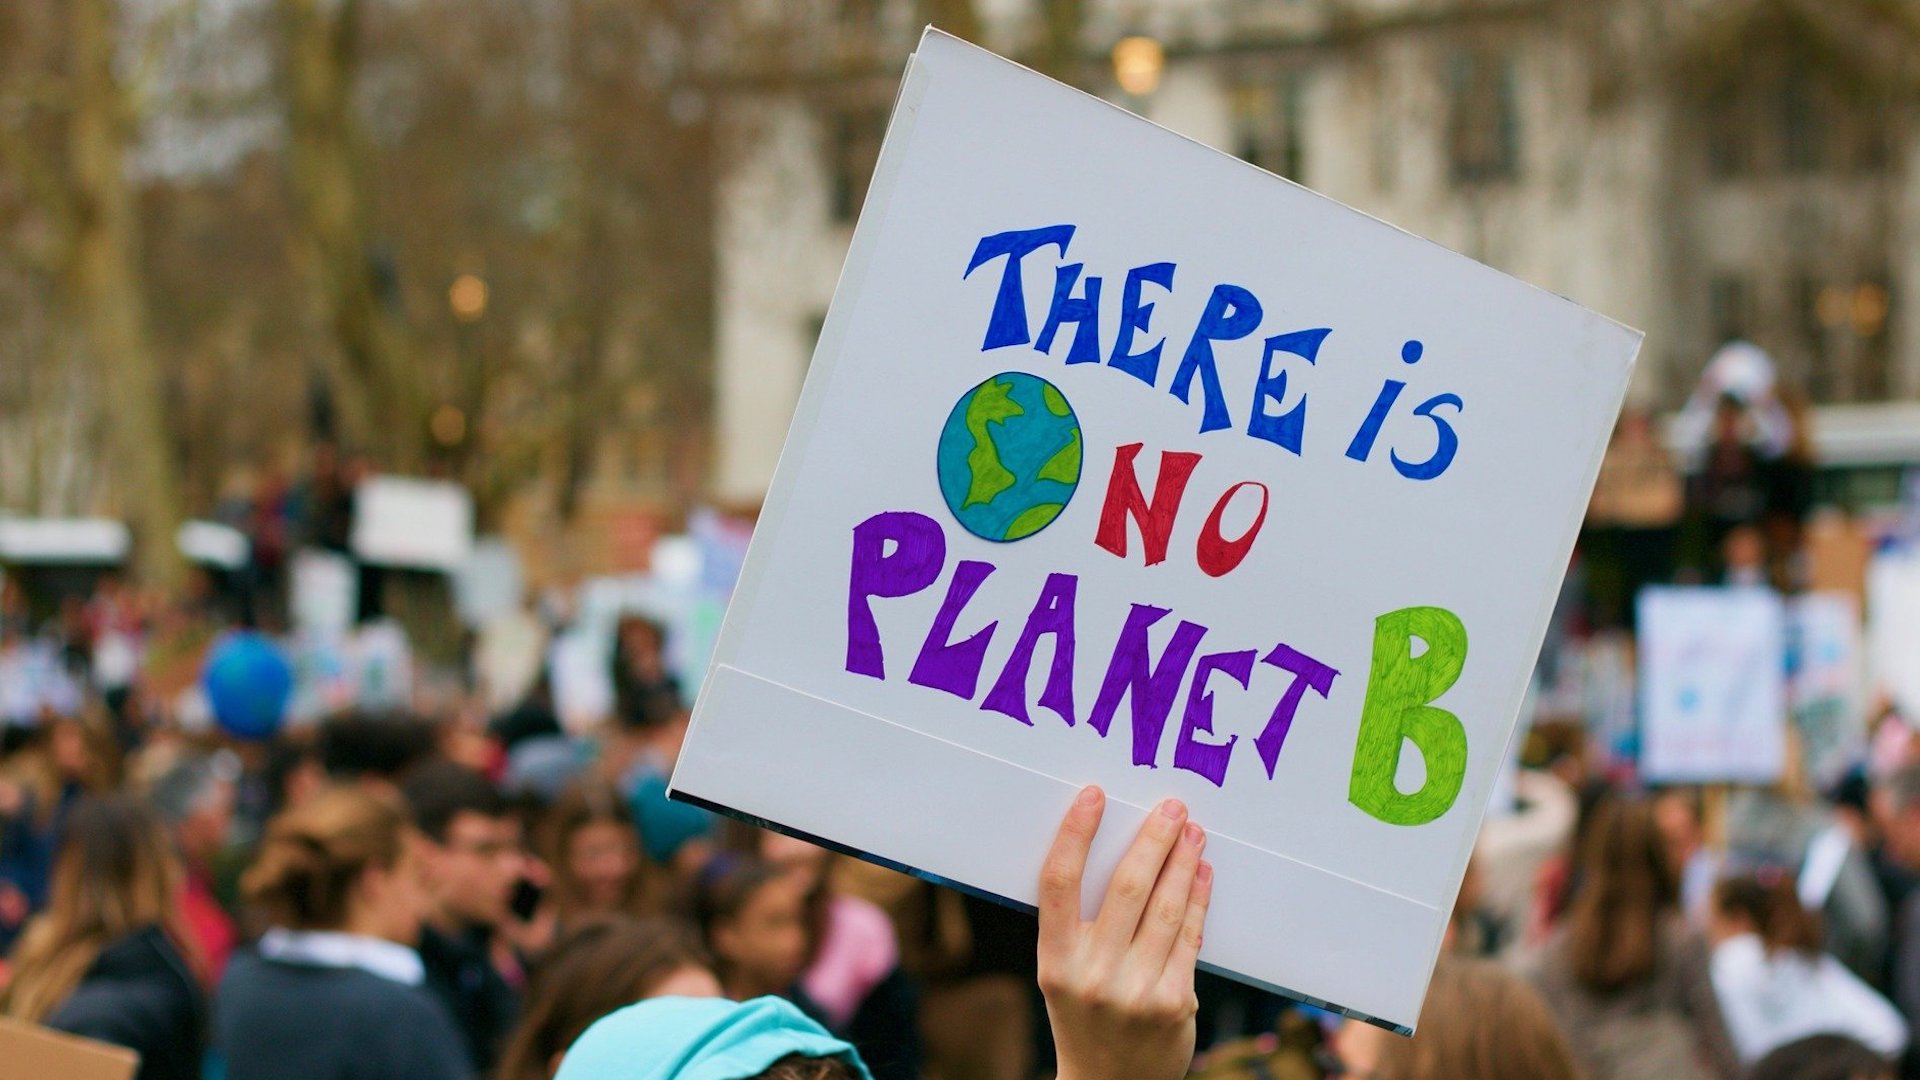 In a crowd of people outdoors, a hand holds up a placard that reads "There is no planet B"